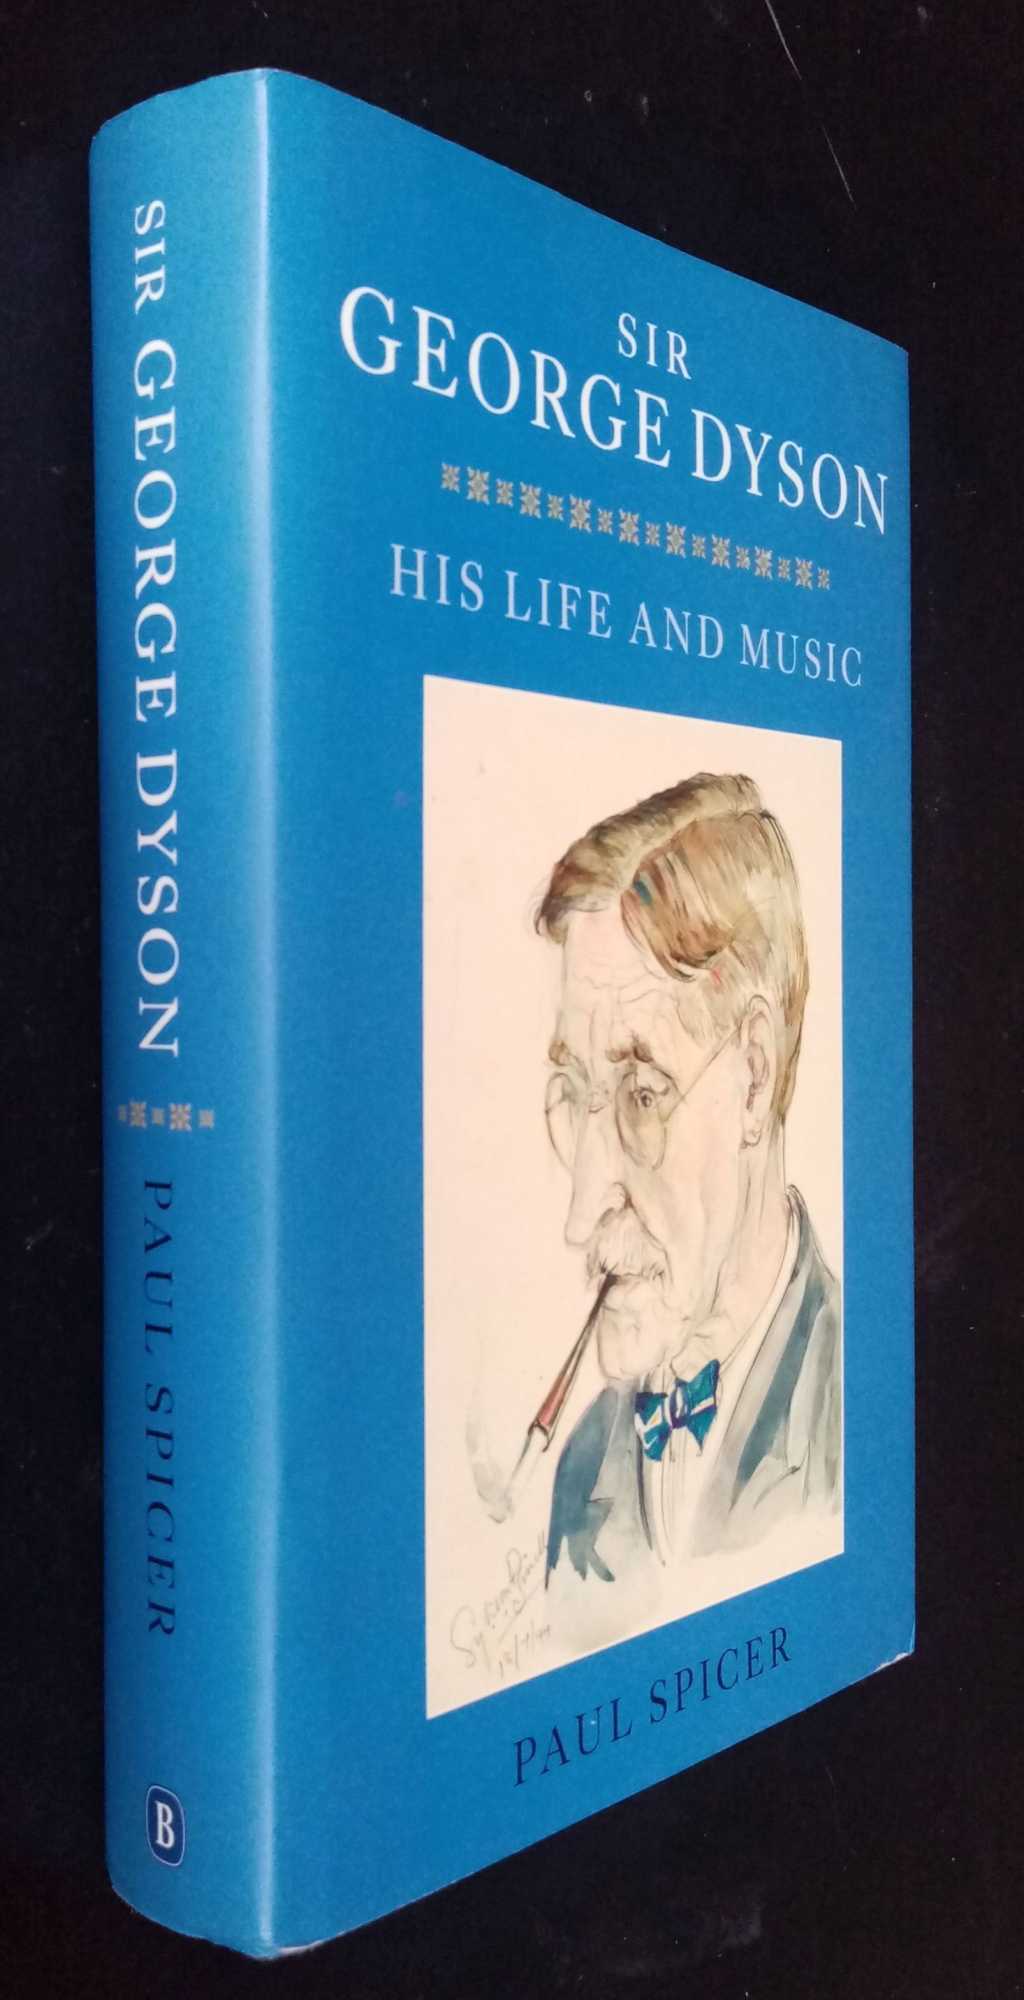 Paul Spicer - Sir George Dyson: His Life and Music